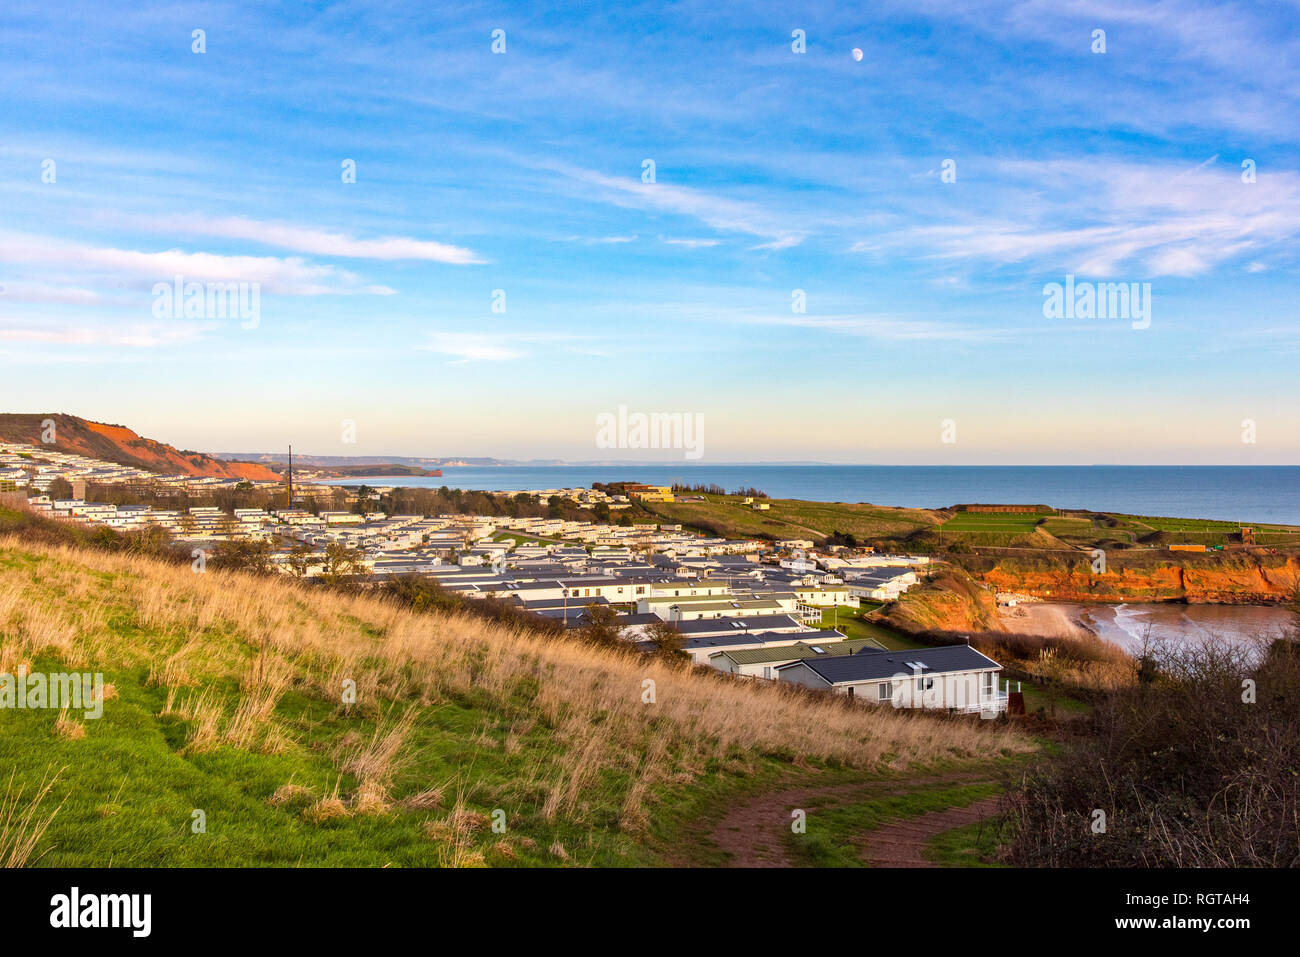 View of the Devon Cliffs Holiday Park at Sandy Bay, Exmouth, Devon, UK. With Budleigh Bay and Otter Head in the distance. Stock Photo